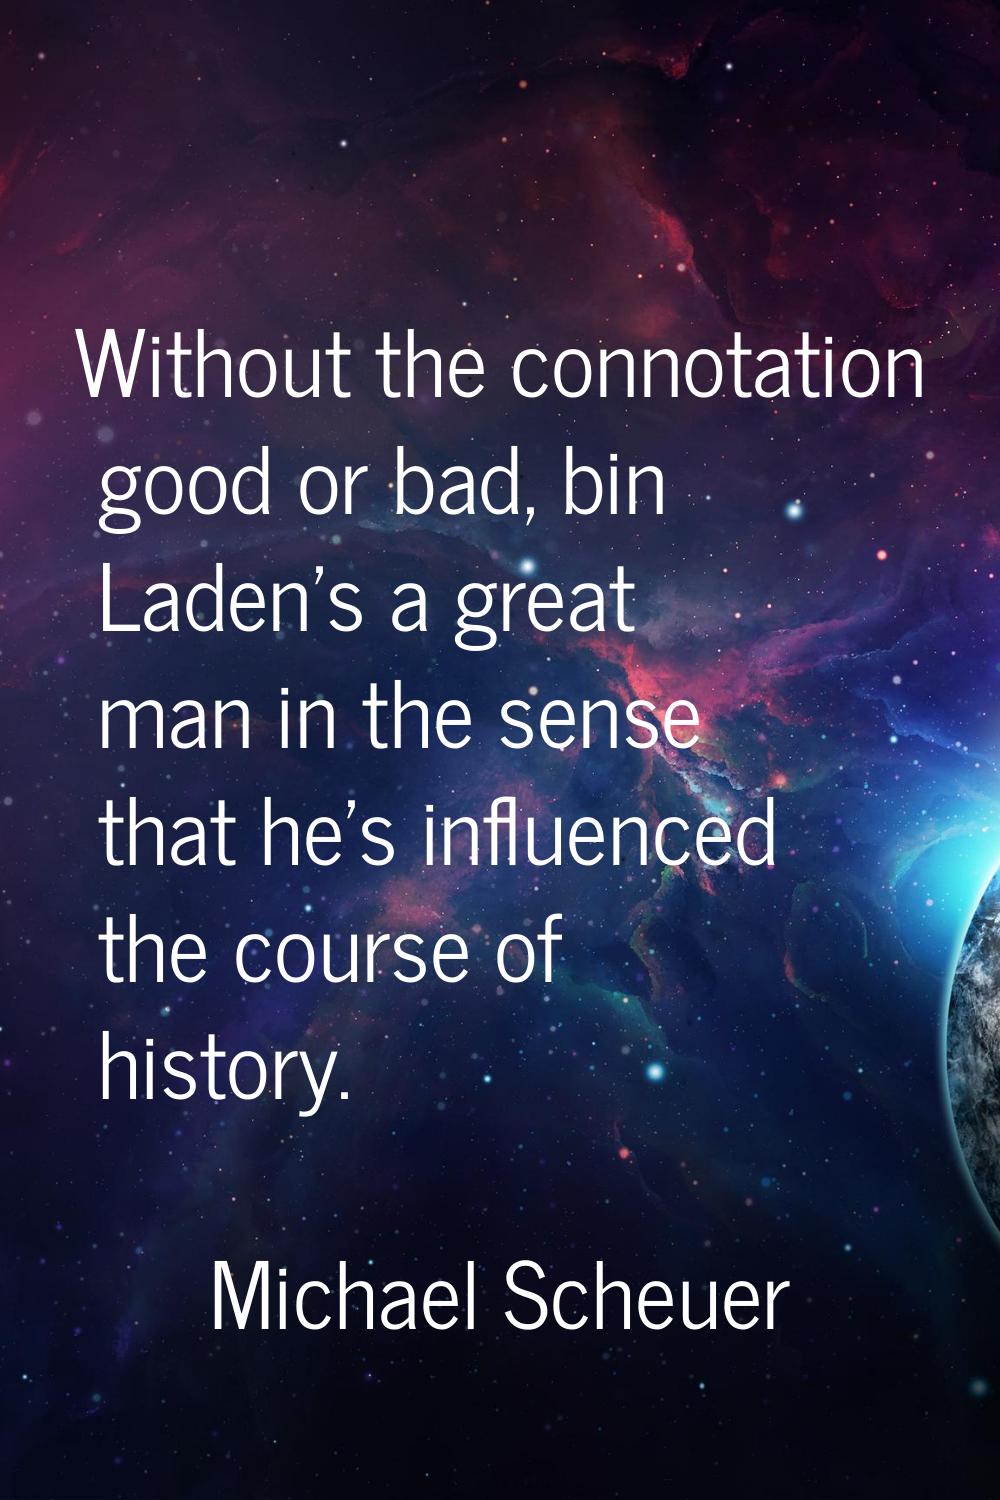 Without the connotation good or bad, bin Laden's a great man in the sense that he's influenced the 